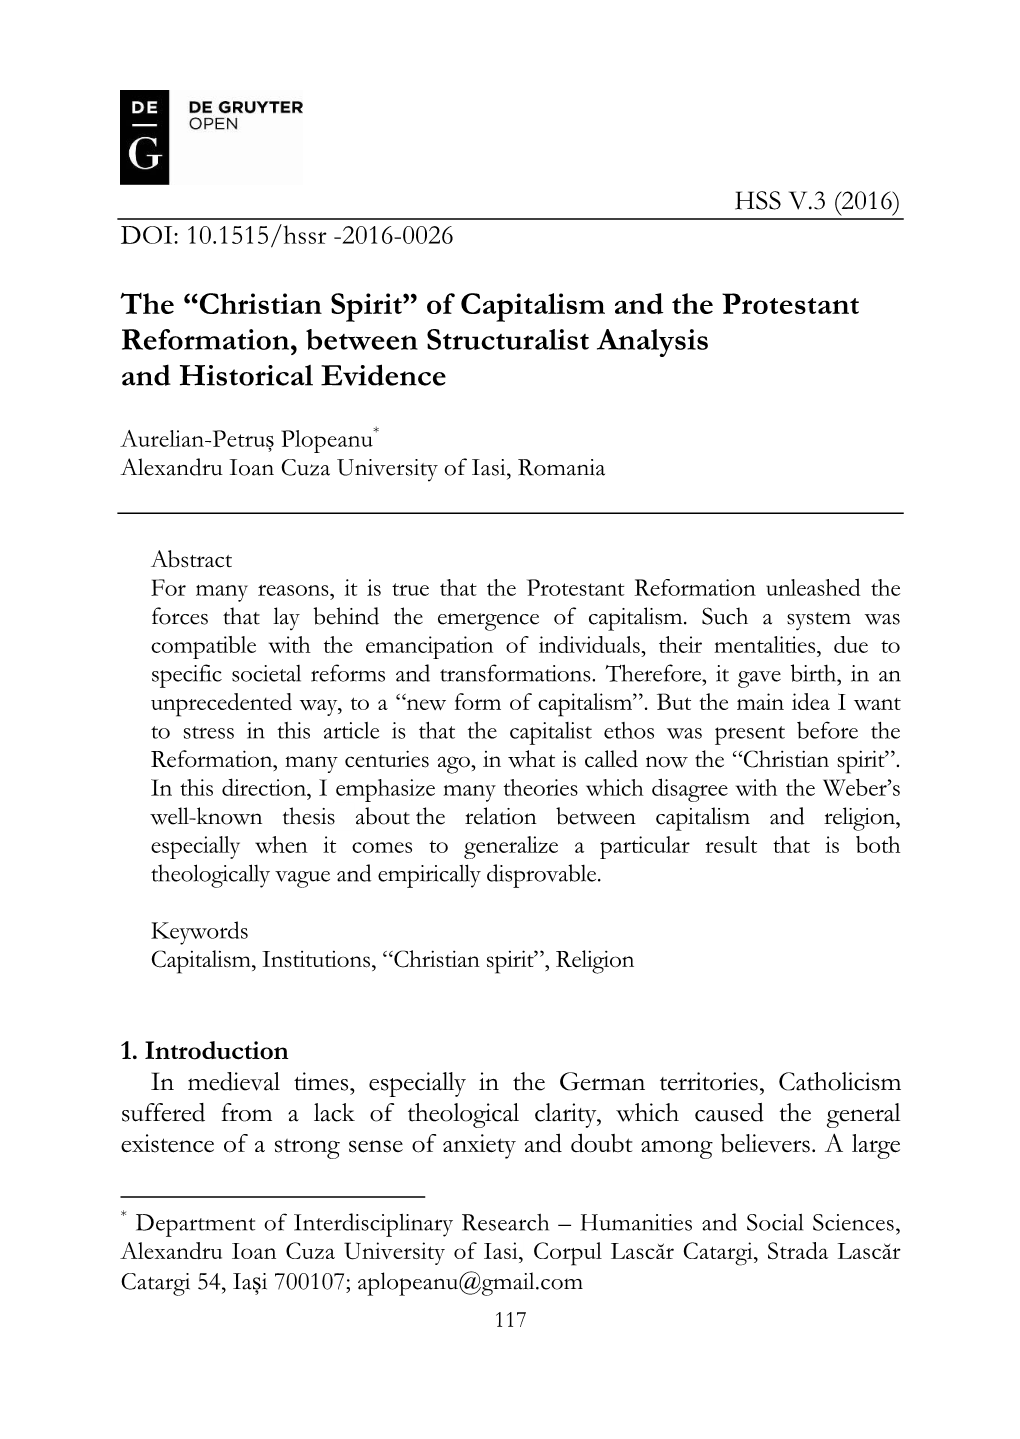 Of Capitalism and the Protestant Reformation, Between Structuralist Analysis and Historical Evidence